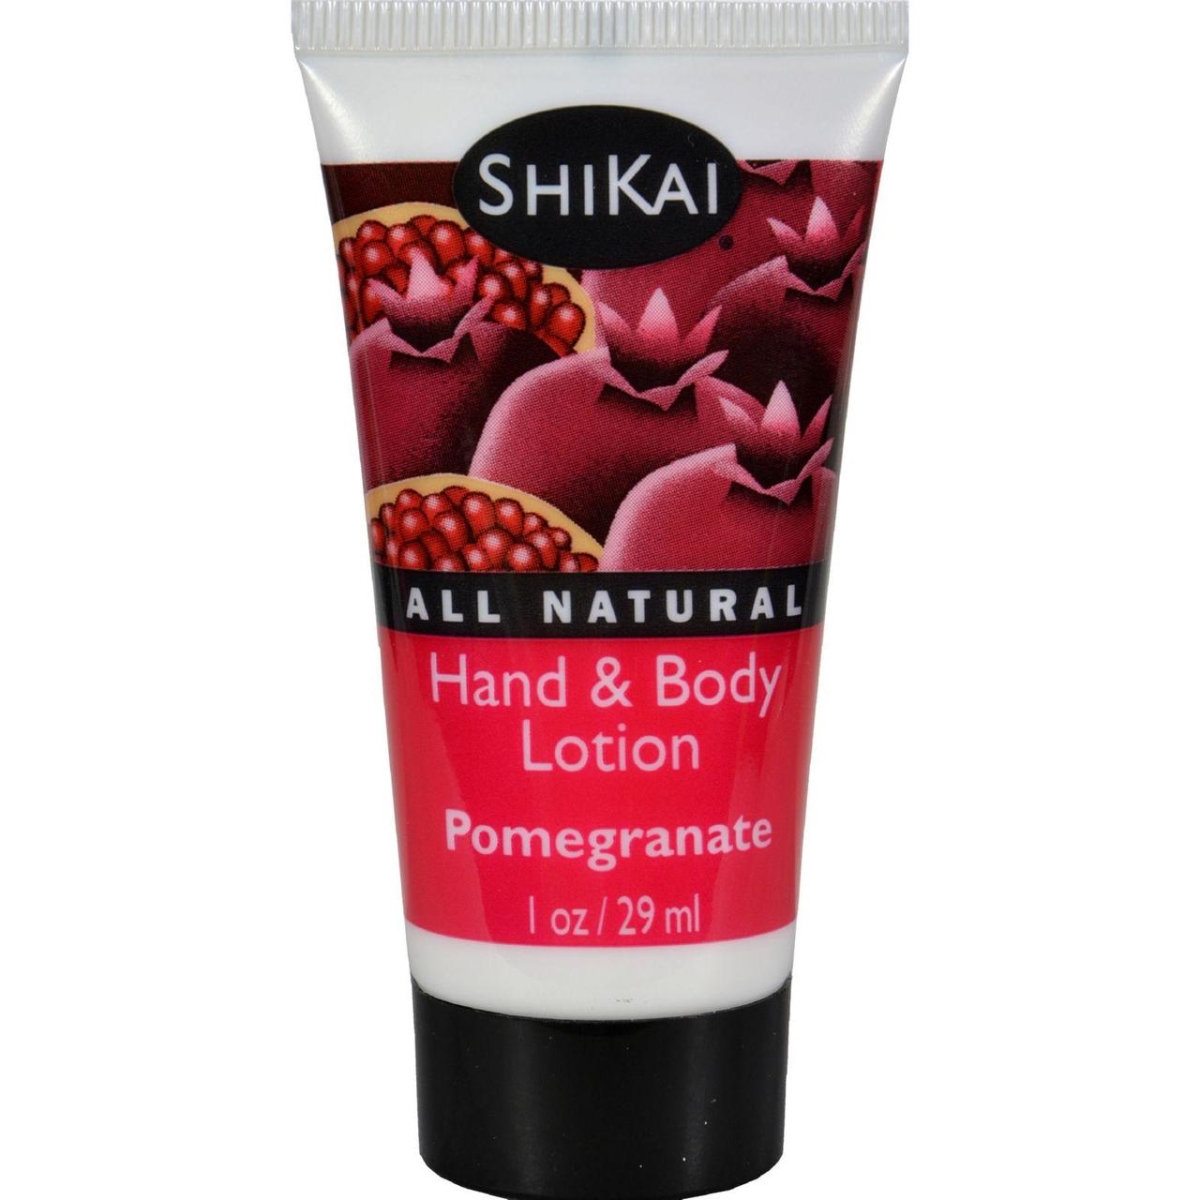 Hg0366435 1 Oz All Natural Pomegranate Lotion - Trial Size, Case Of 12